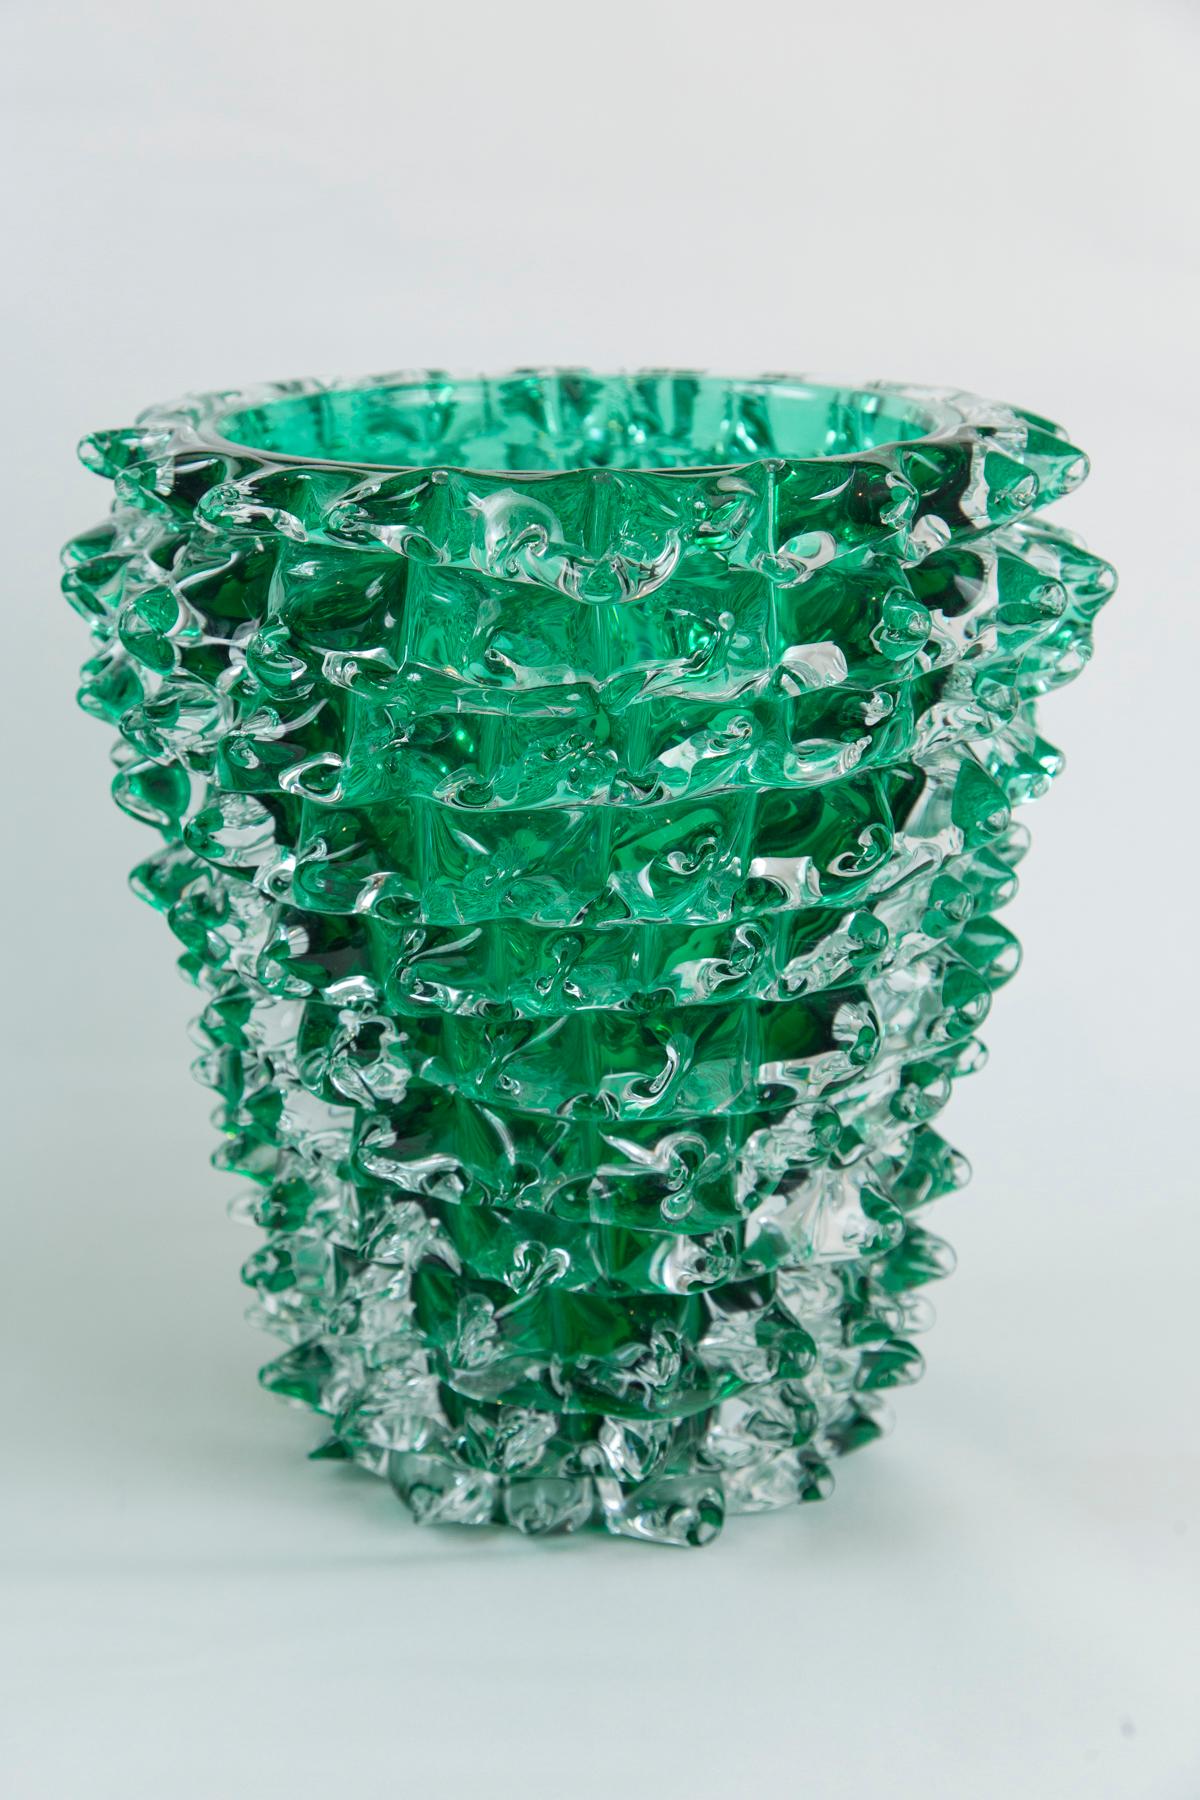 Paolo Crepax Murano Green Glass Vase In Good Condition For Sale In Westport, CT